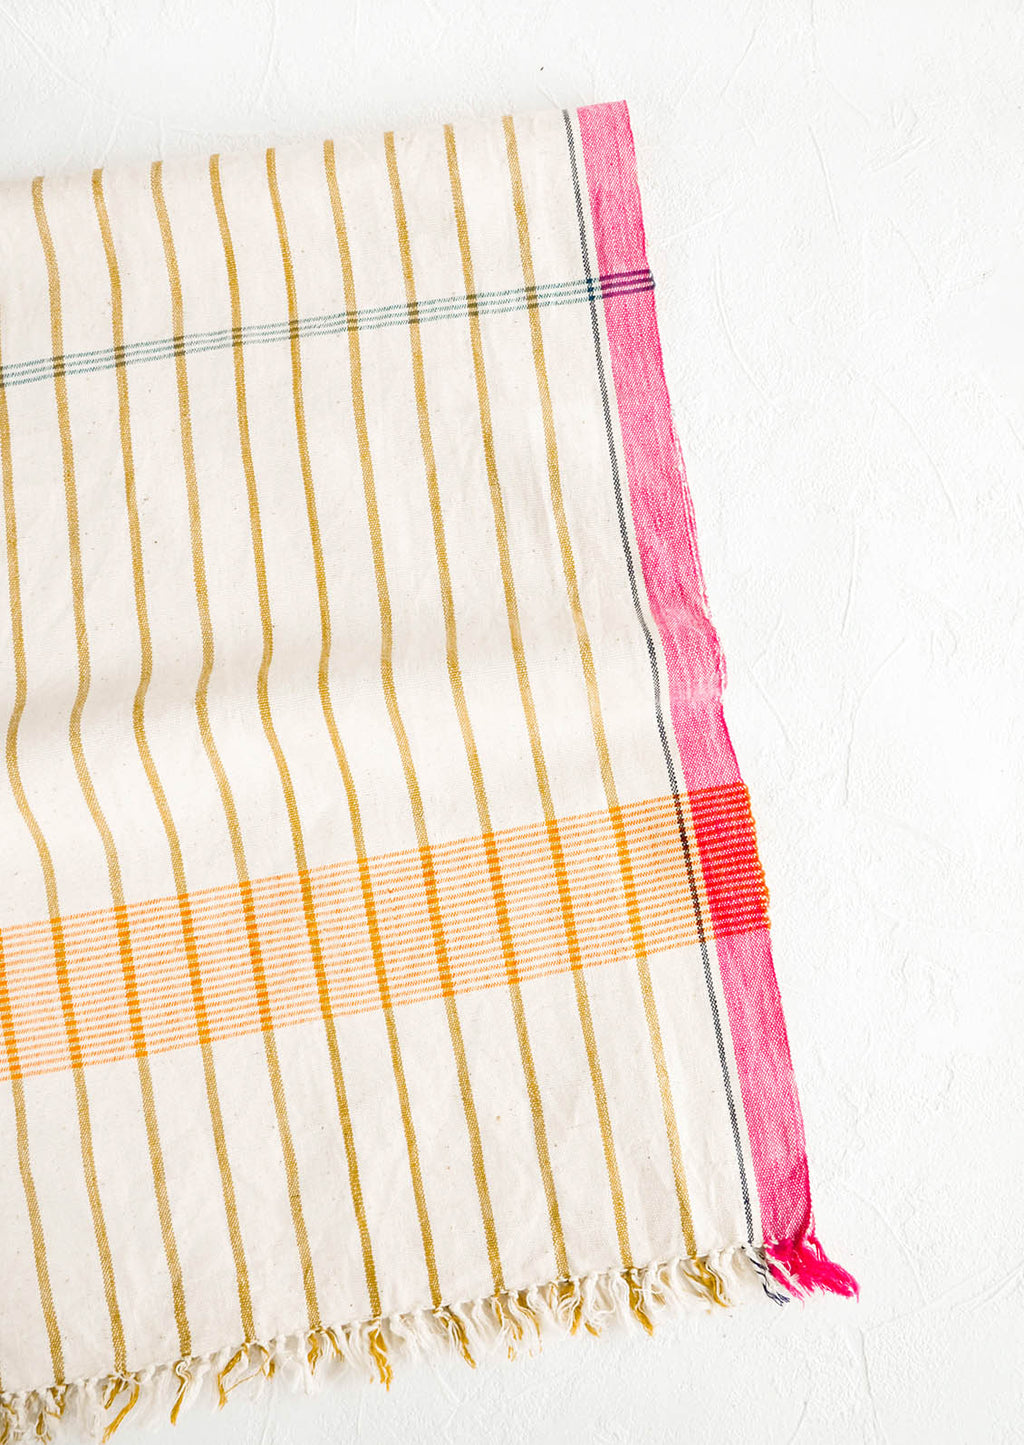 3: Cotton table runner in plaid/stripe print in a mix of bright colors